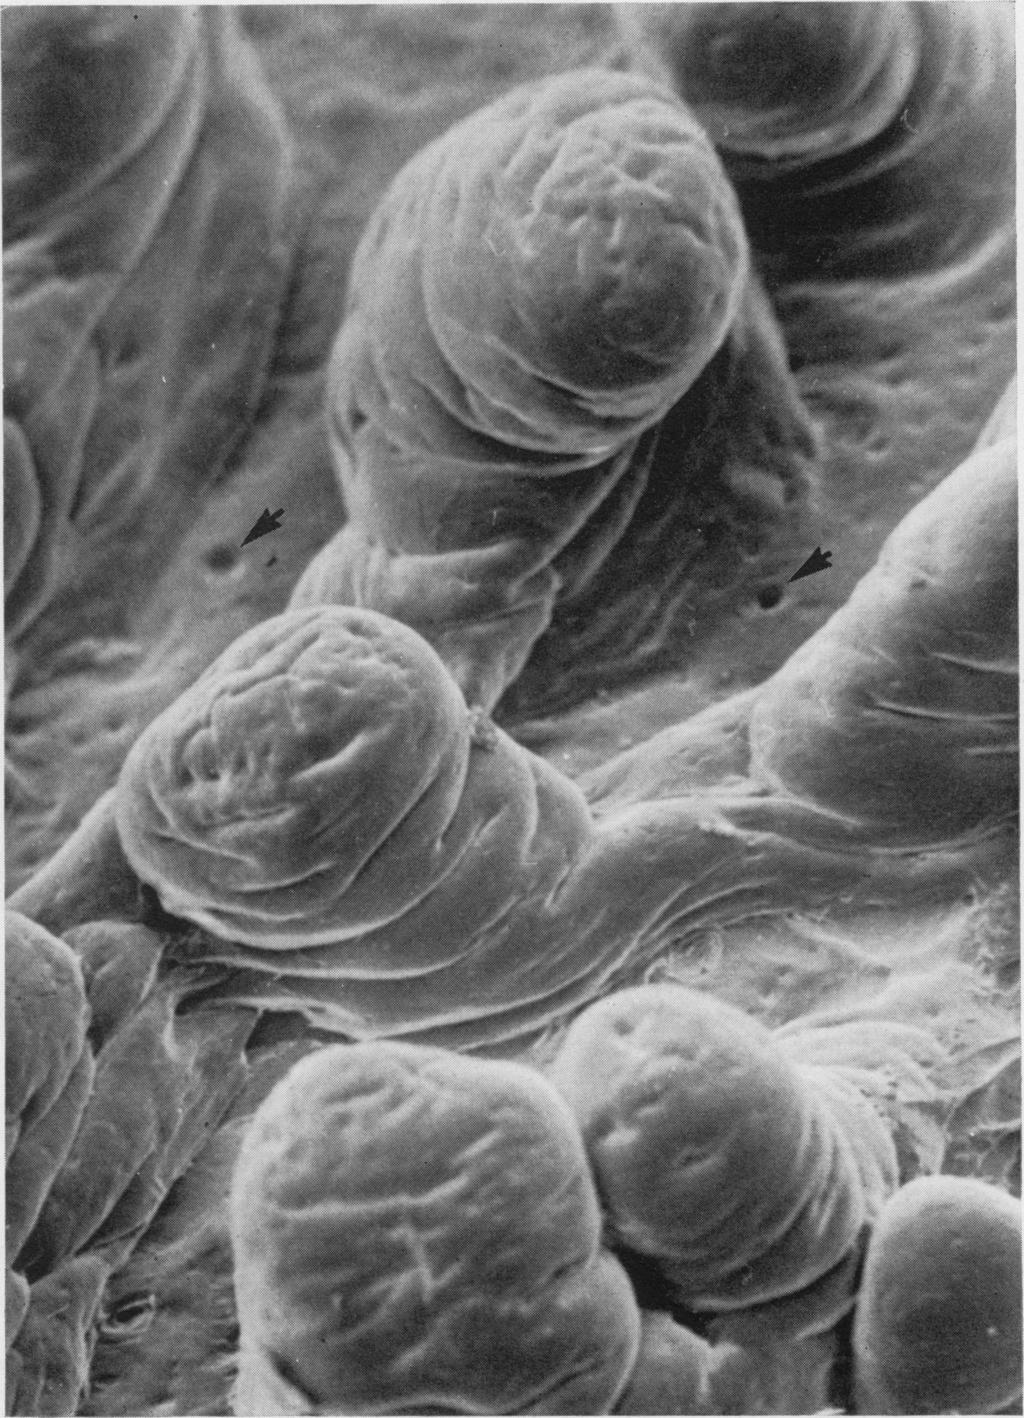 473 Scanning and transmission electron microscopic studies of human intestinal mucosa Gut: first published as 10.1136/gut.11.6.471 on 1 June 1970. Downloaded from http://gut.bmj.com/ Fig.